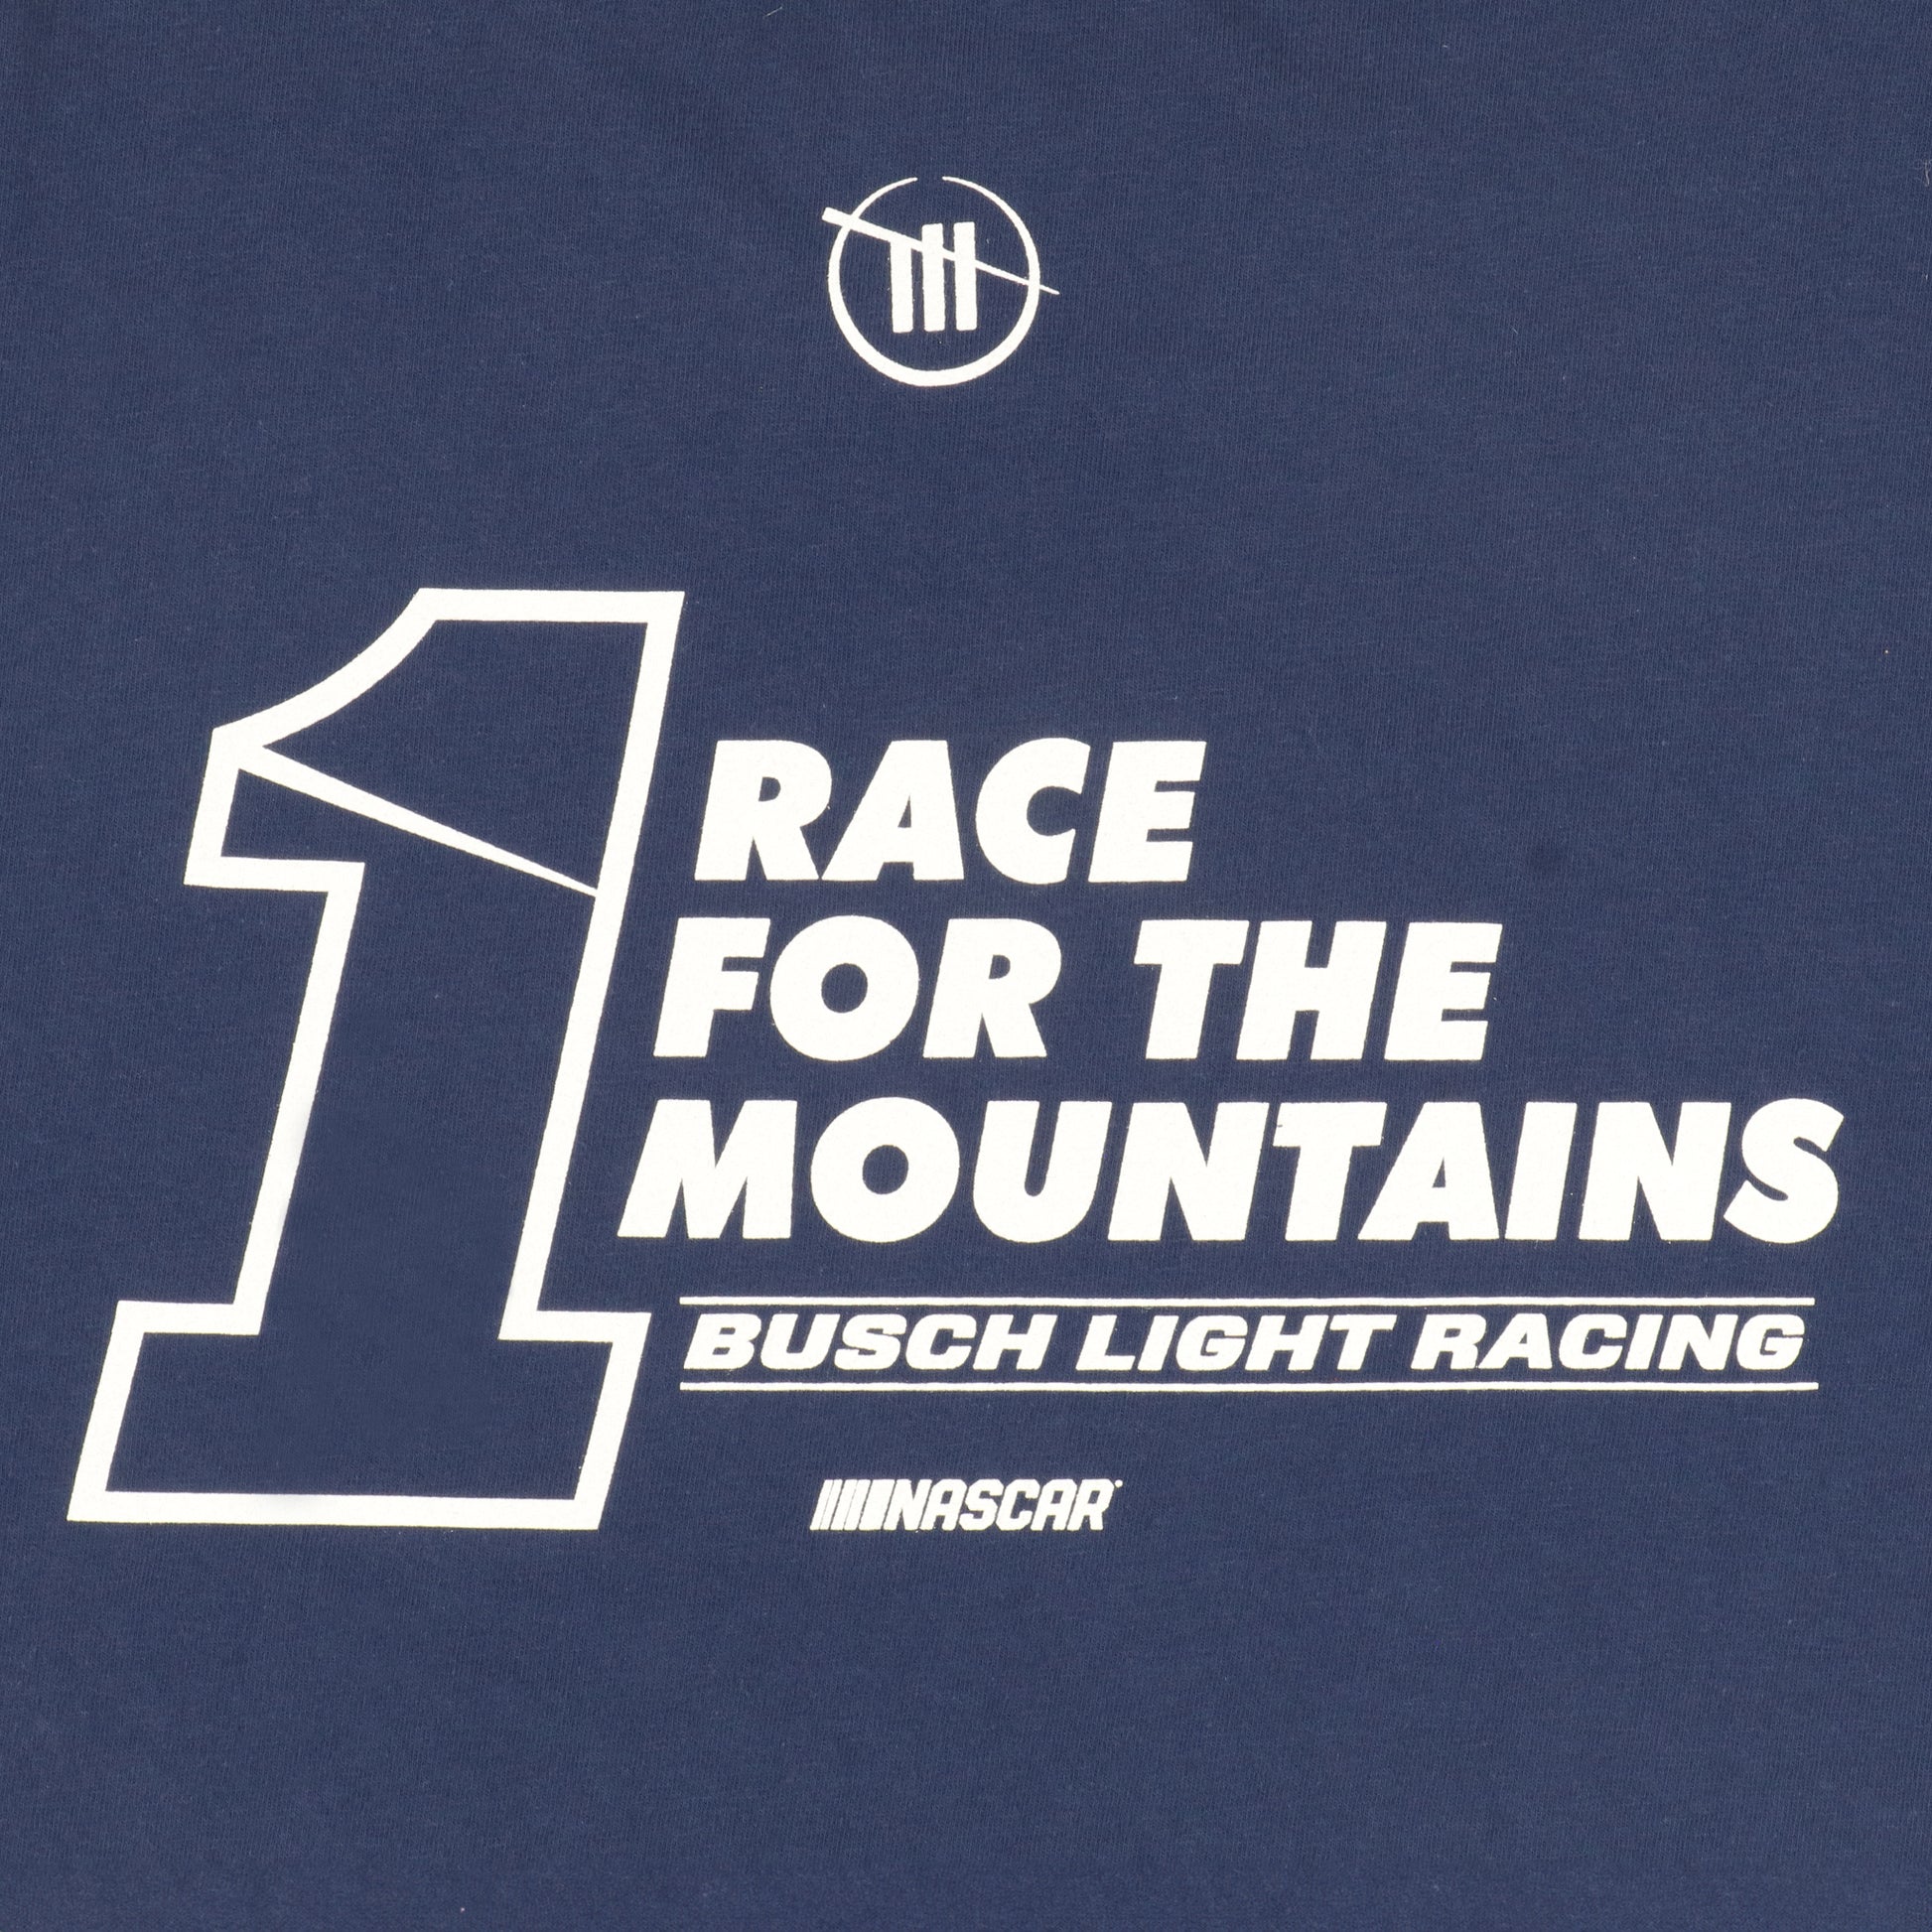 #1 Race for the Mountains graphic on back of T-Shirt